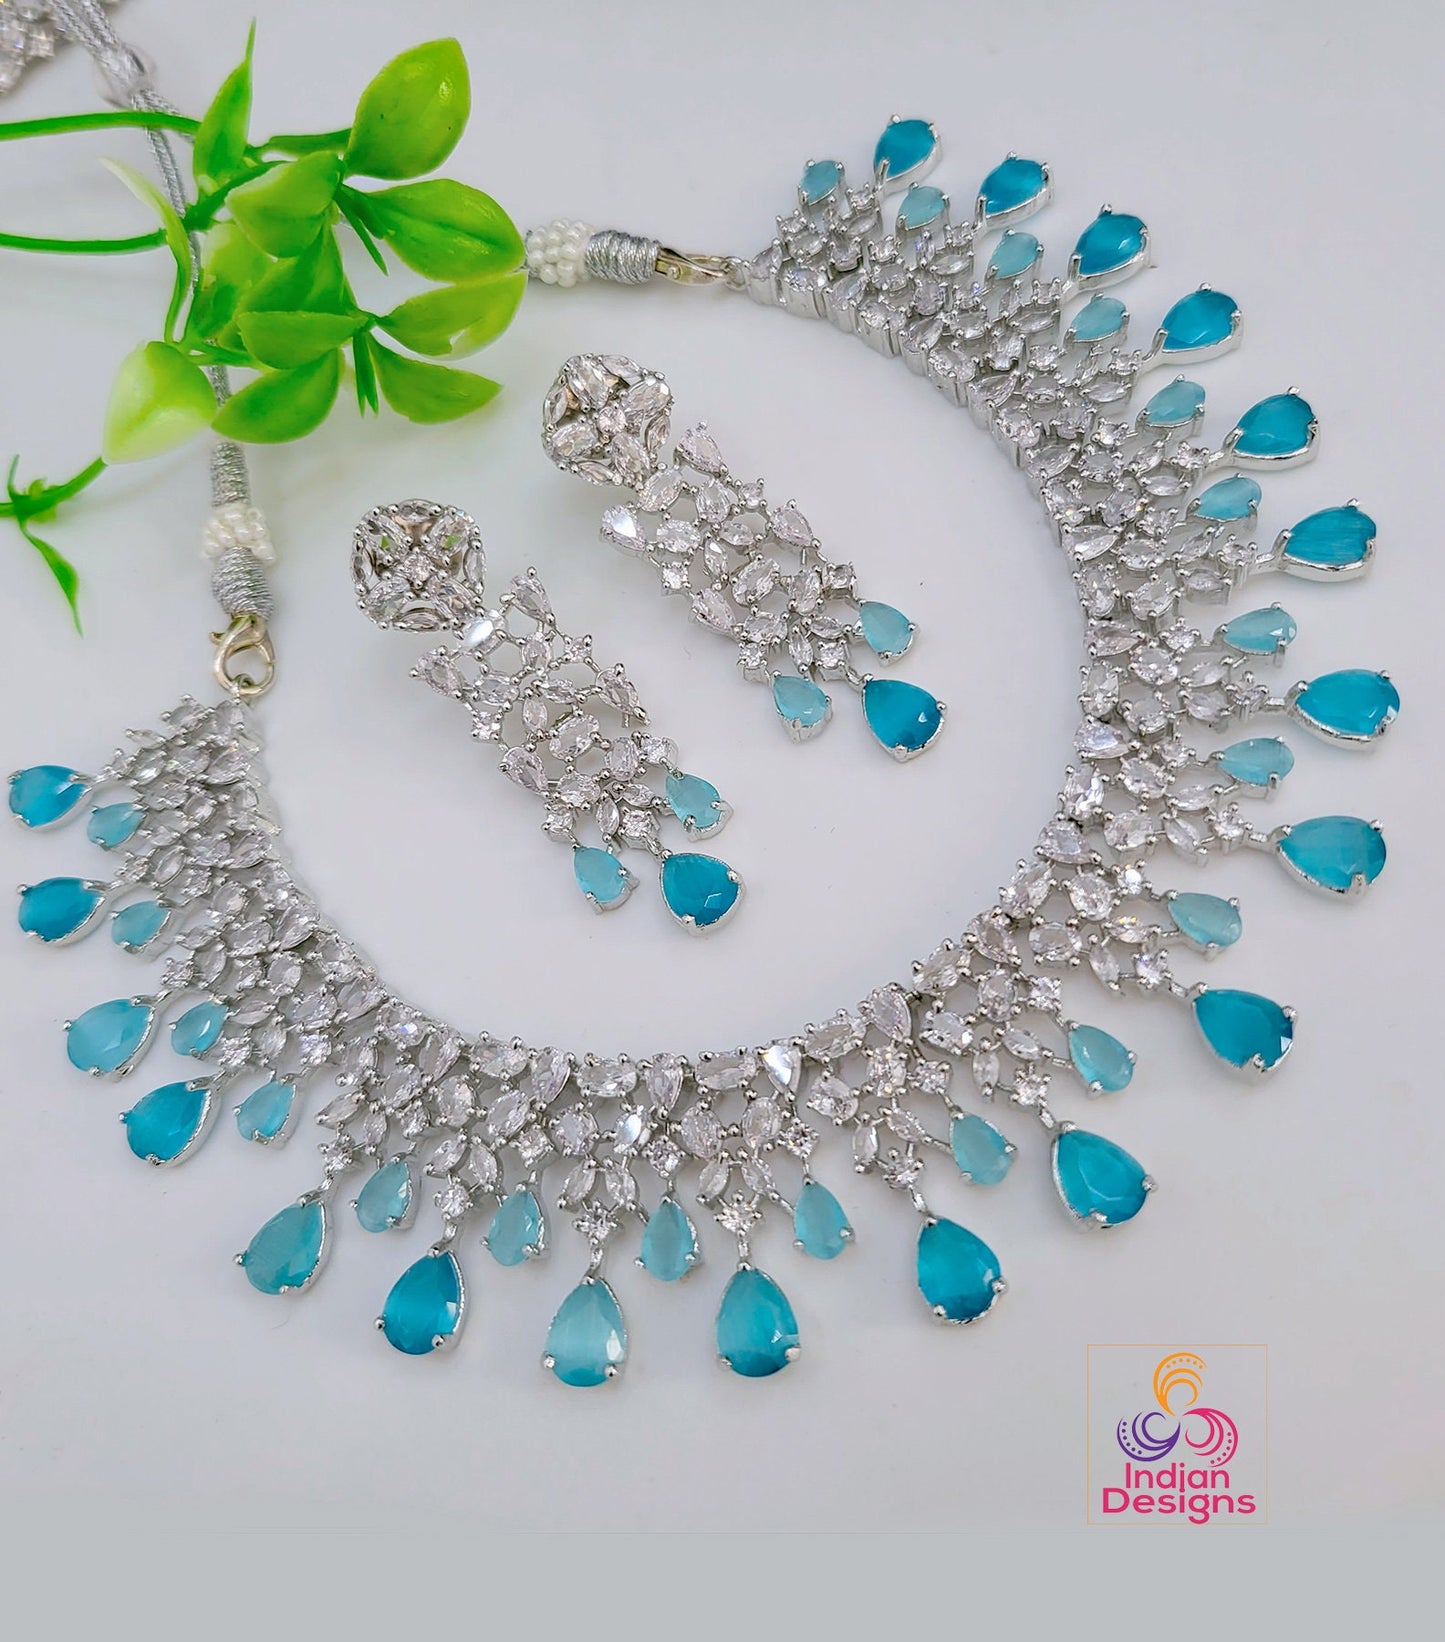 CZ Diamonds Silver Necklace Earrings Set | Pink Bridal Necklace Indian Jewelry Set | Statement Choker set Crystal Jewelry | Indian designs